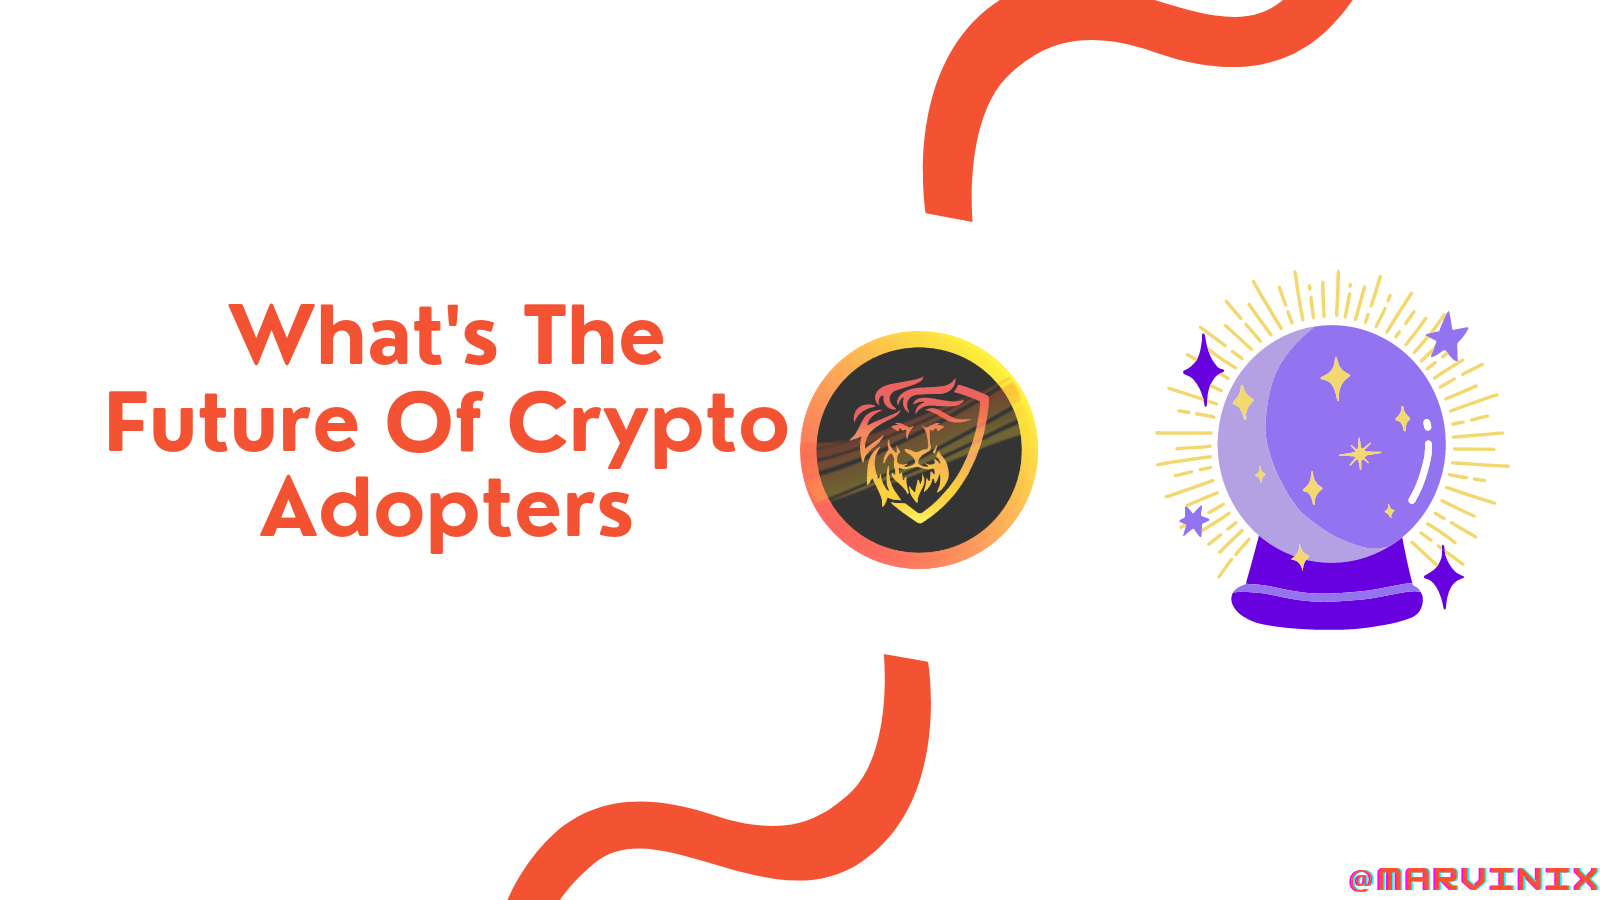 @marvinix/what-s-the-future-of-crypto-adopters